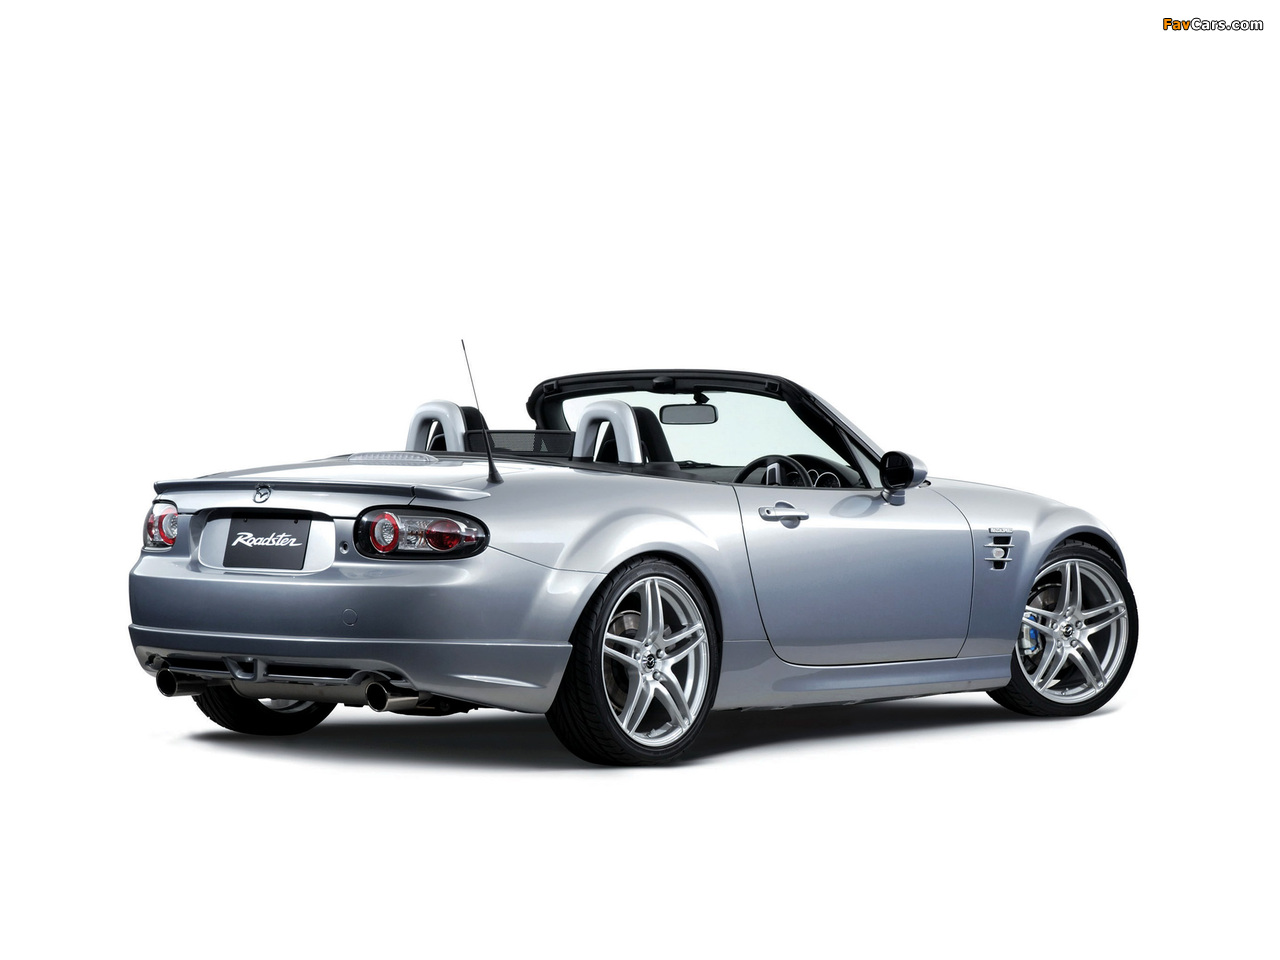 Images of Mazdaspeed Roadster Mz Tune Concept 2006 (1280 x 960)